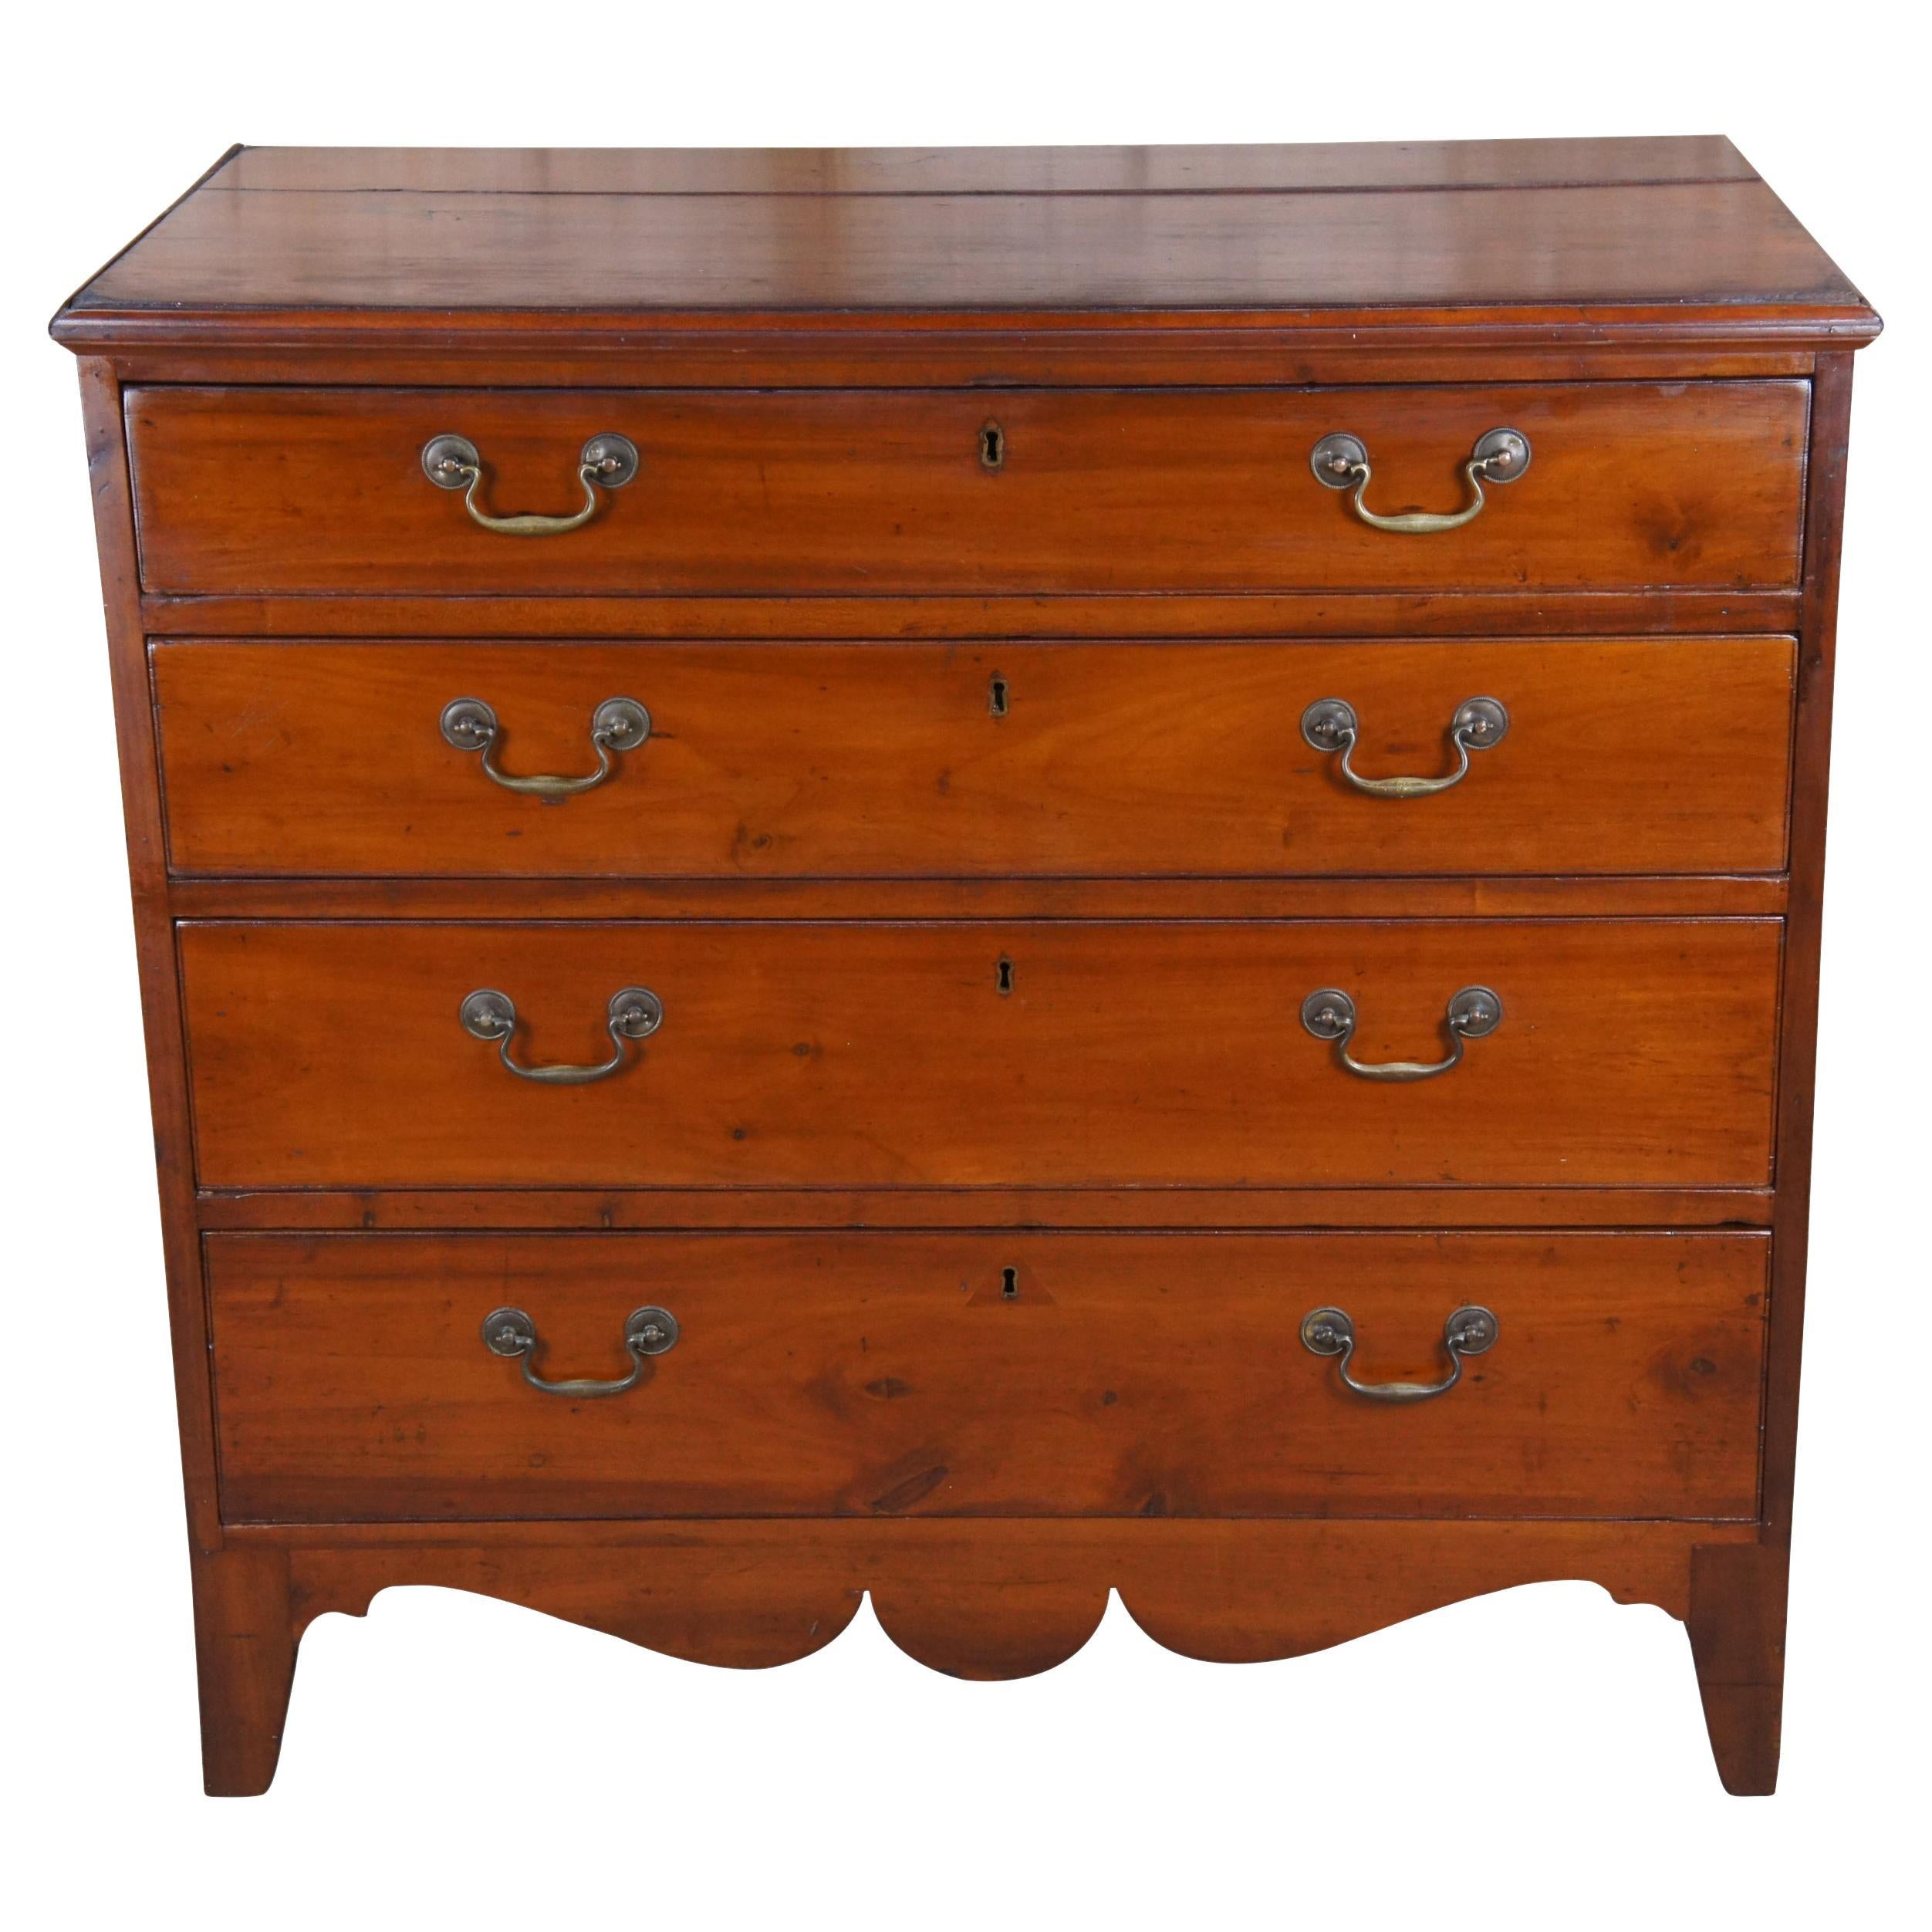 Antique Early 19th Century Federal Period Cherry Dresser Chest of Drawers 40"